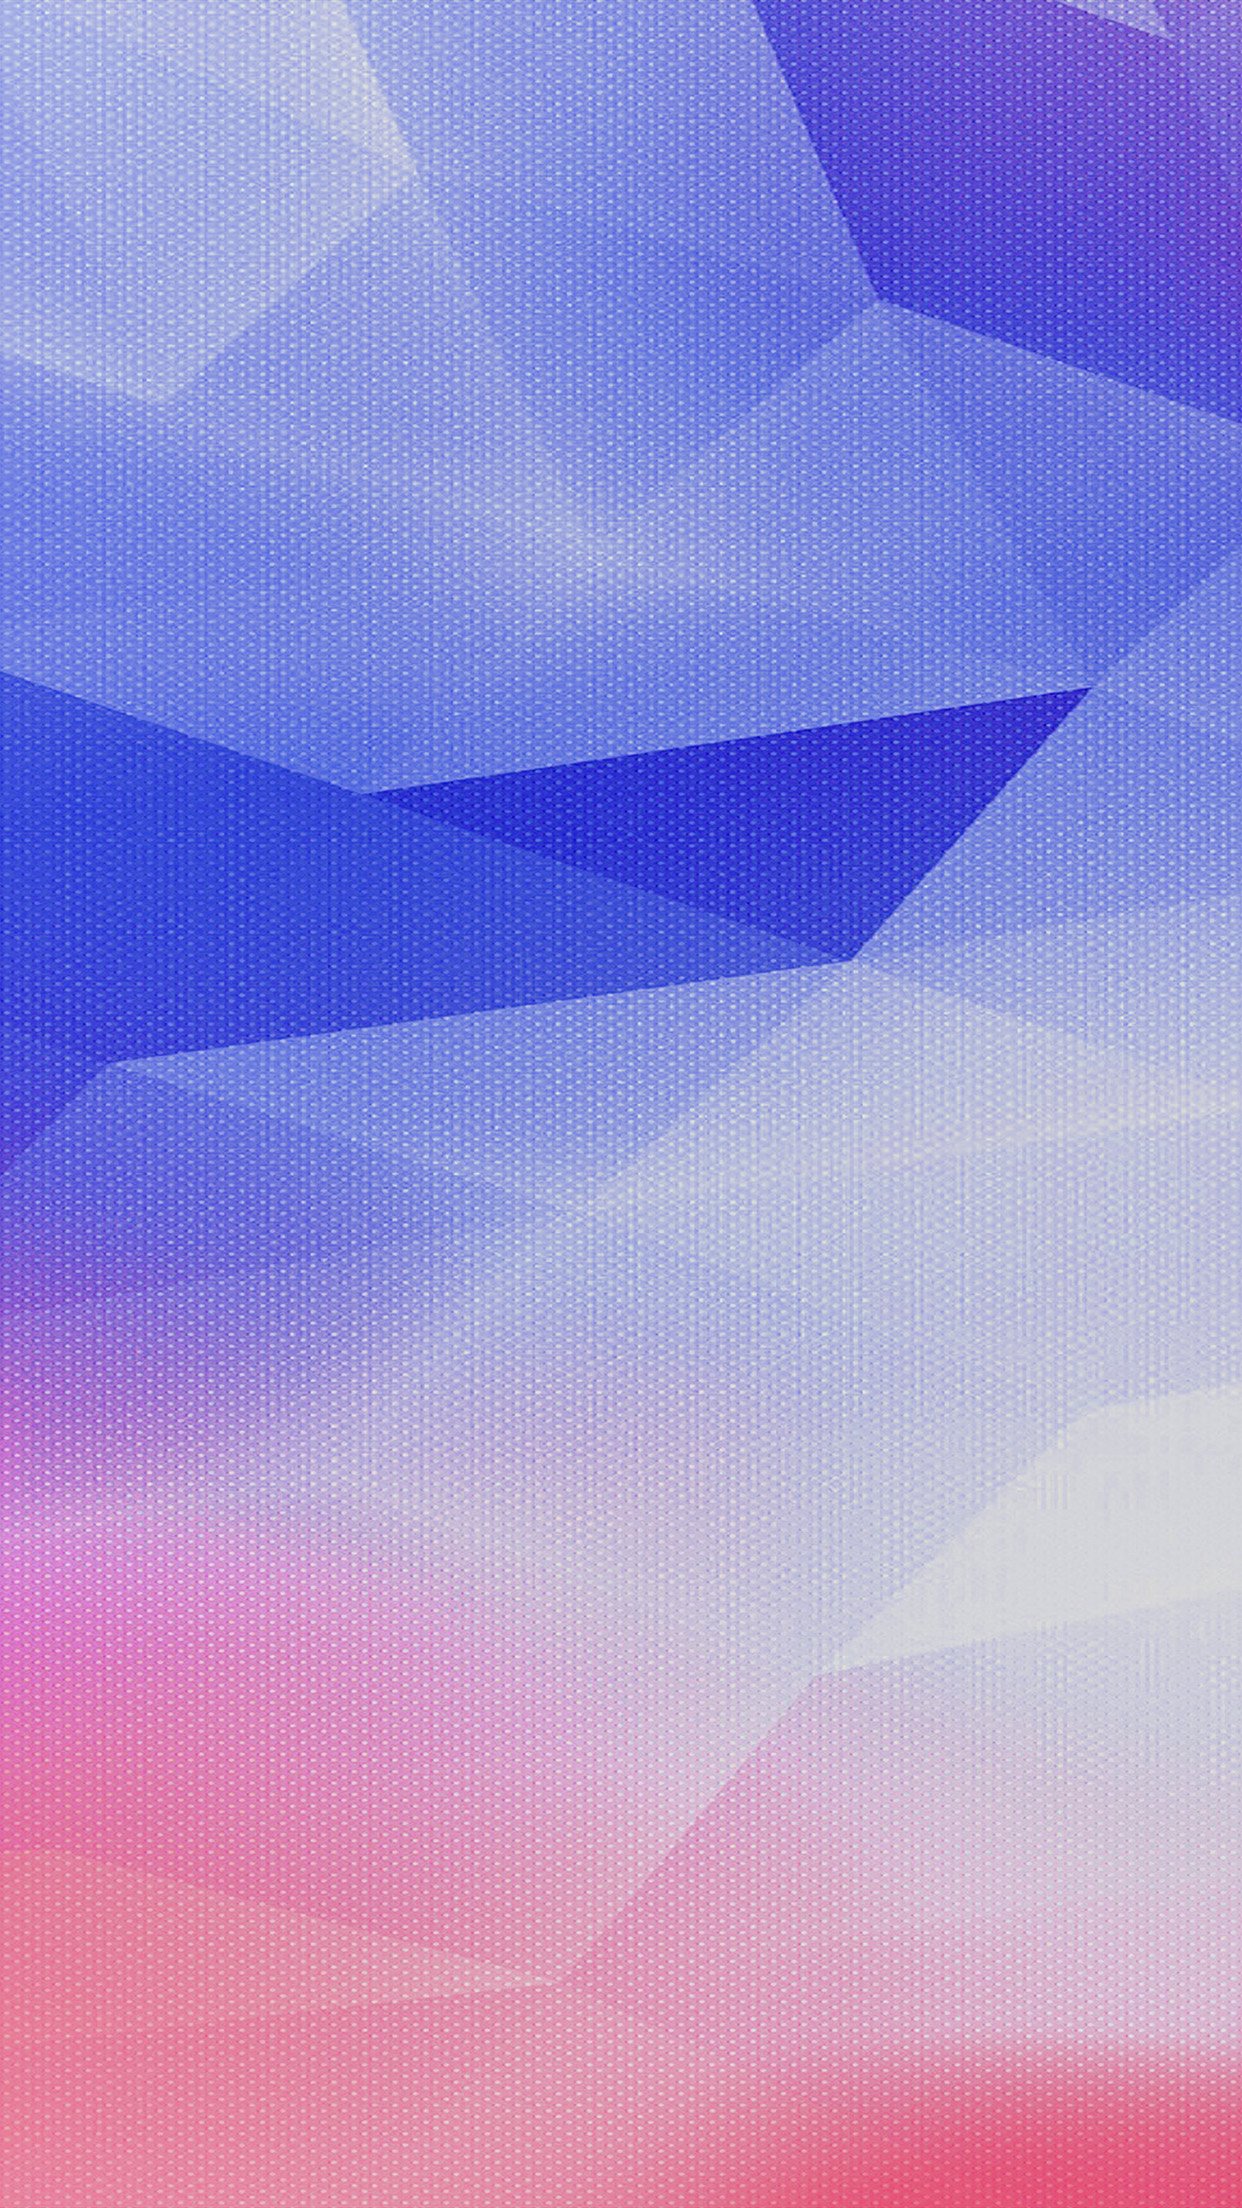 Abstract Red White And Blue - HD Wallpaper 